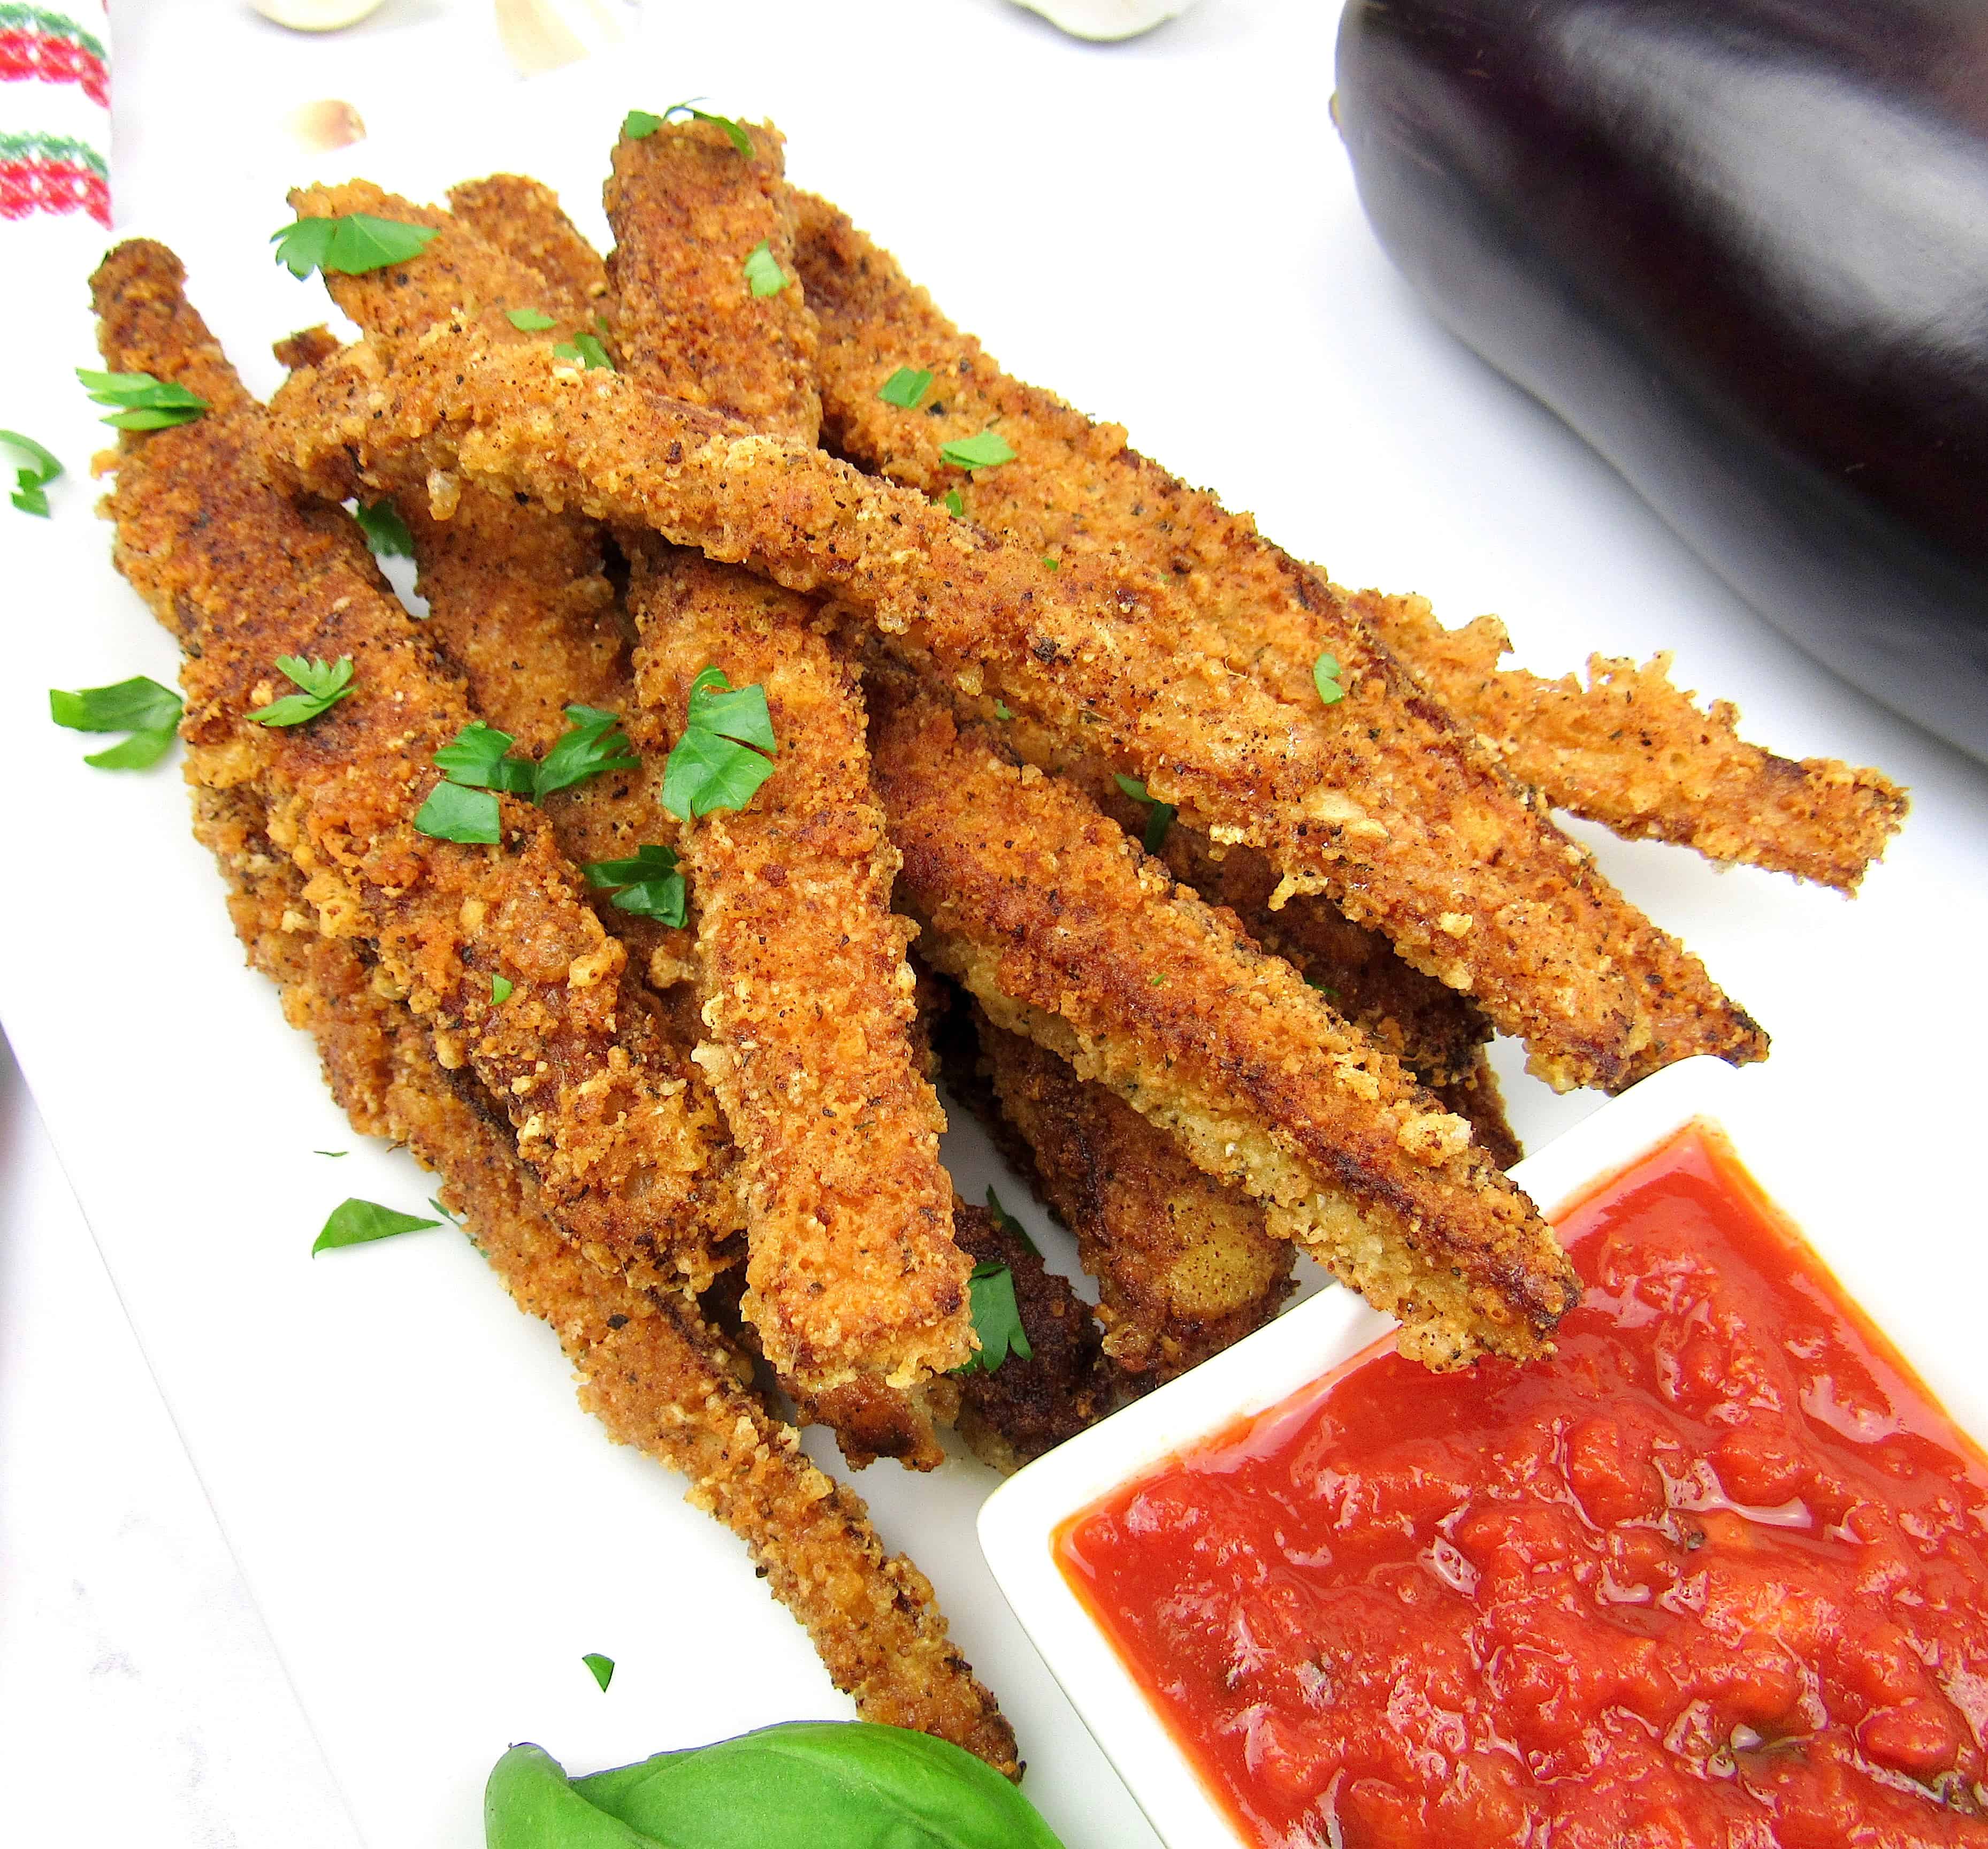 overhead view of eggplant fries with side of marinara sauce